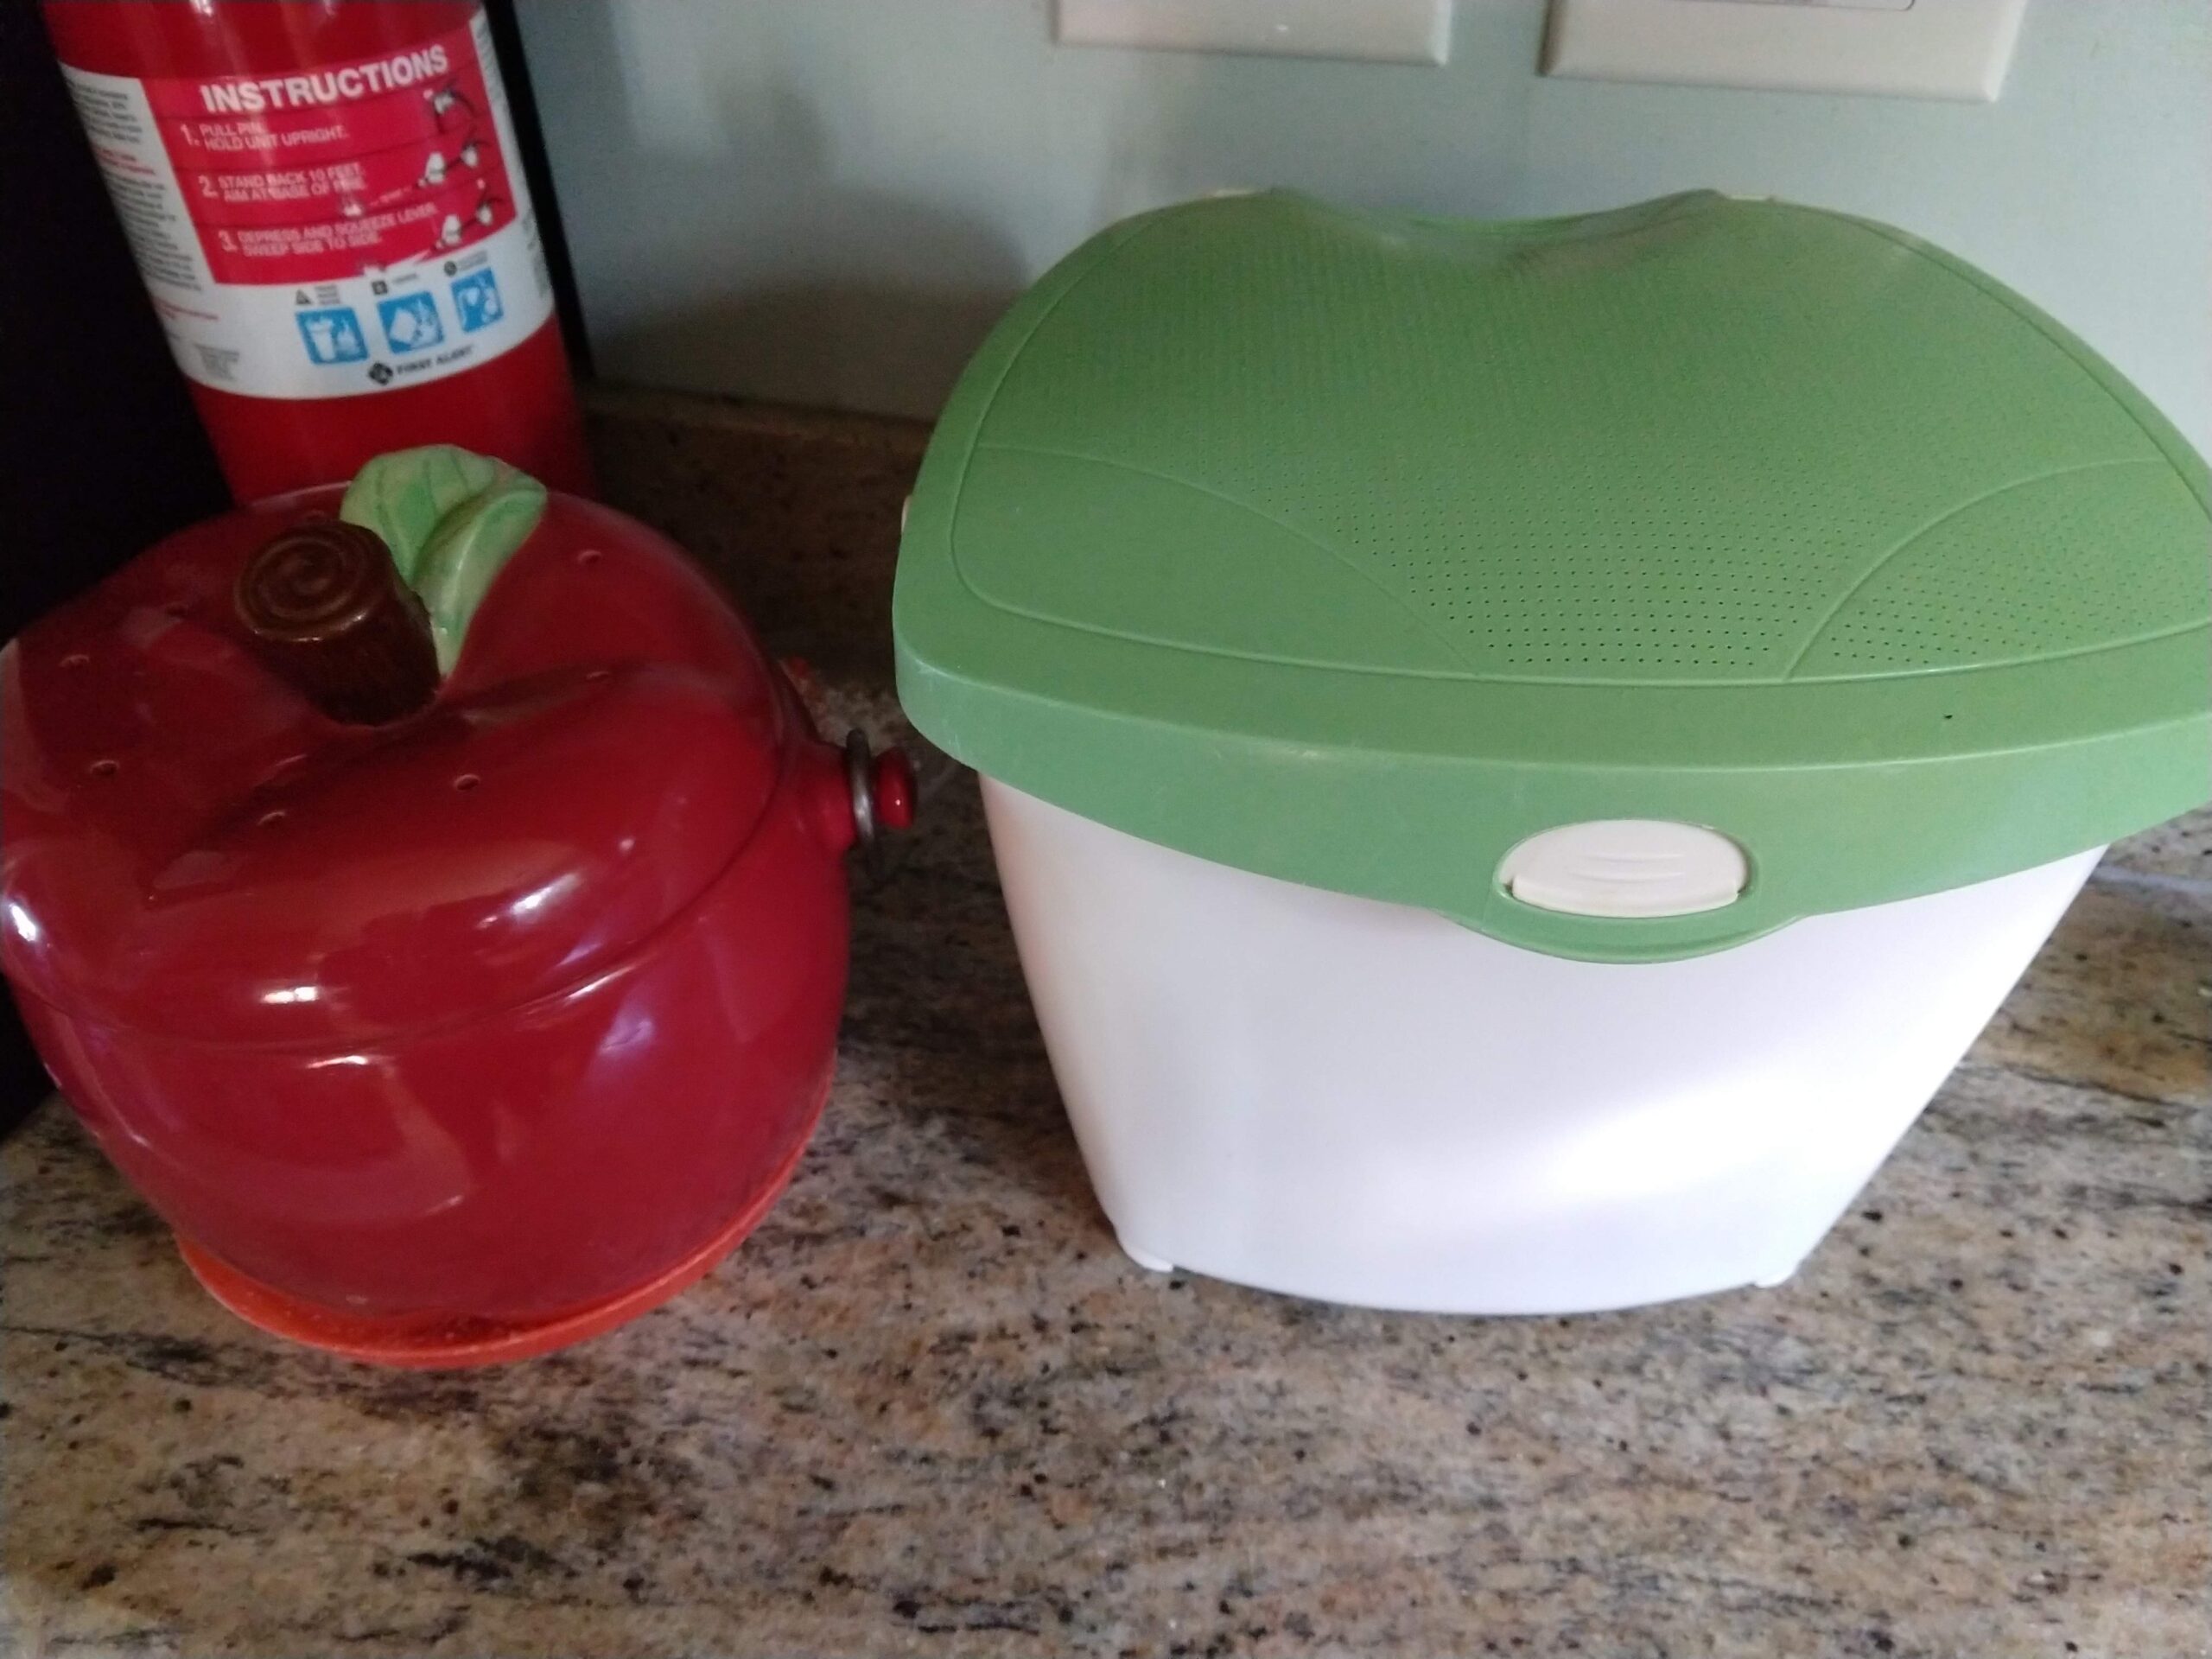 Our gifted ceramic apple and City-issued plastic bins